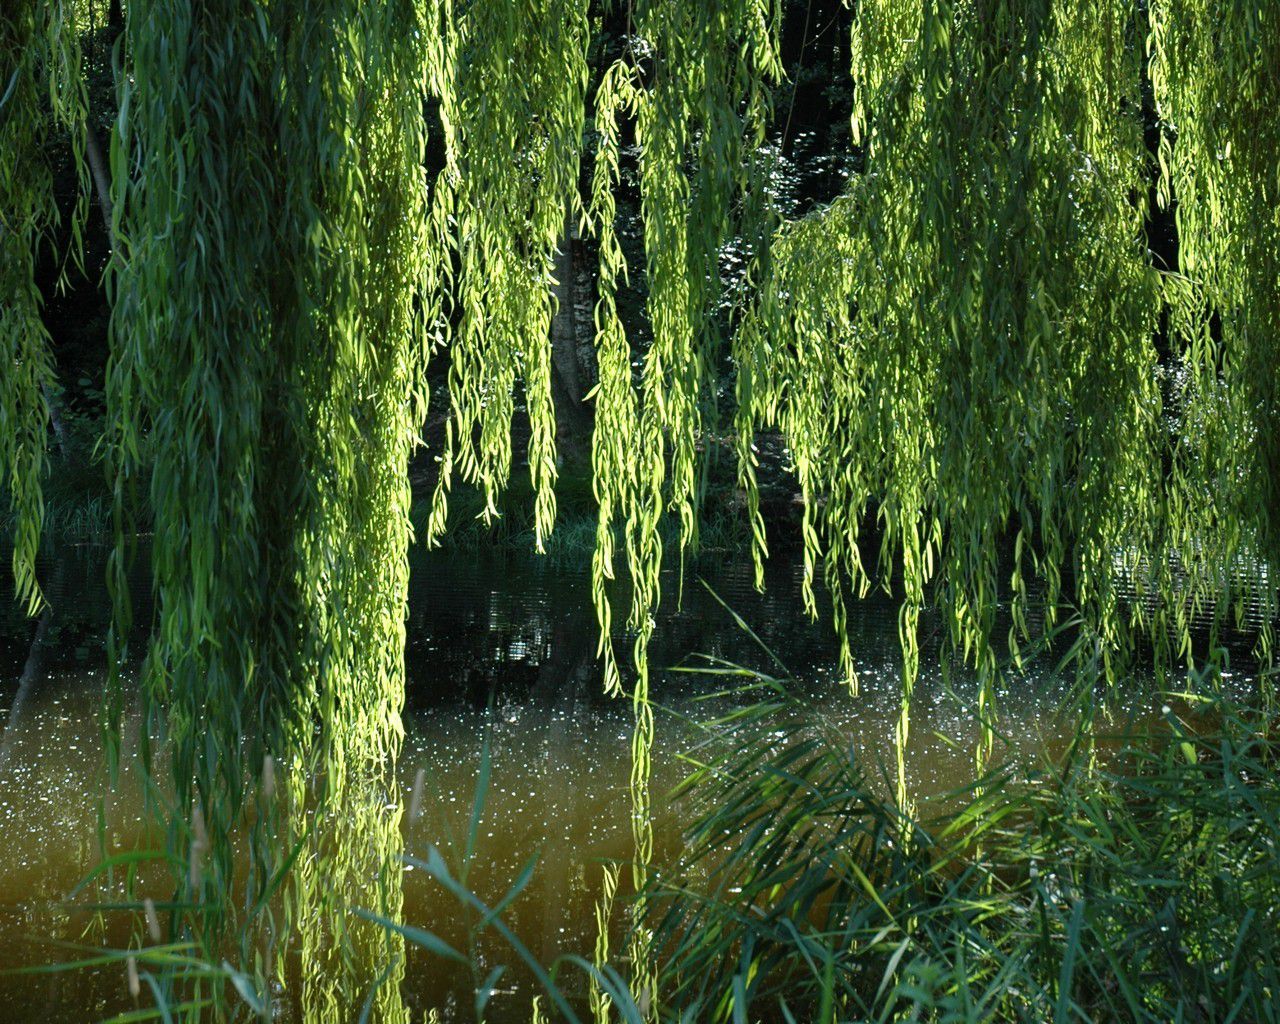 Weeping willow. © Michele Bighignoli, Flickr CC by nc-sa 2.0